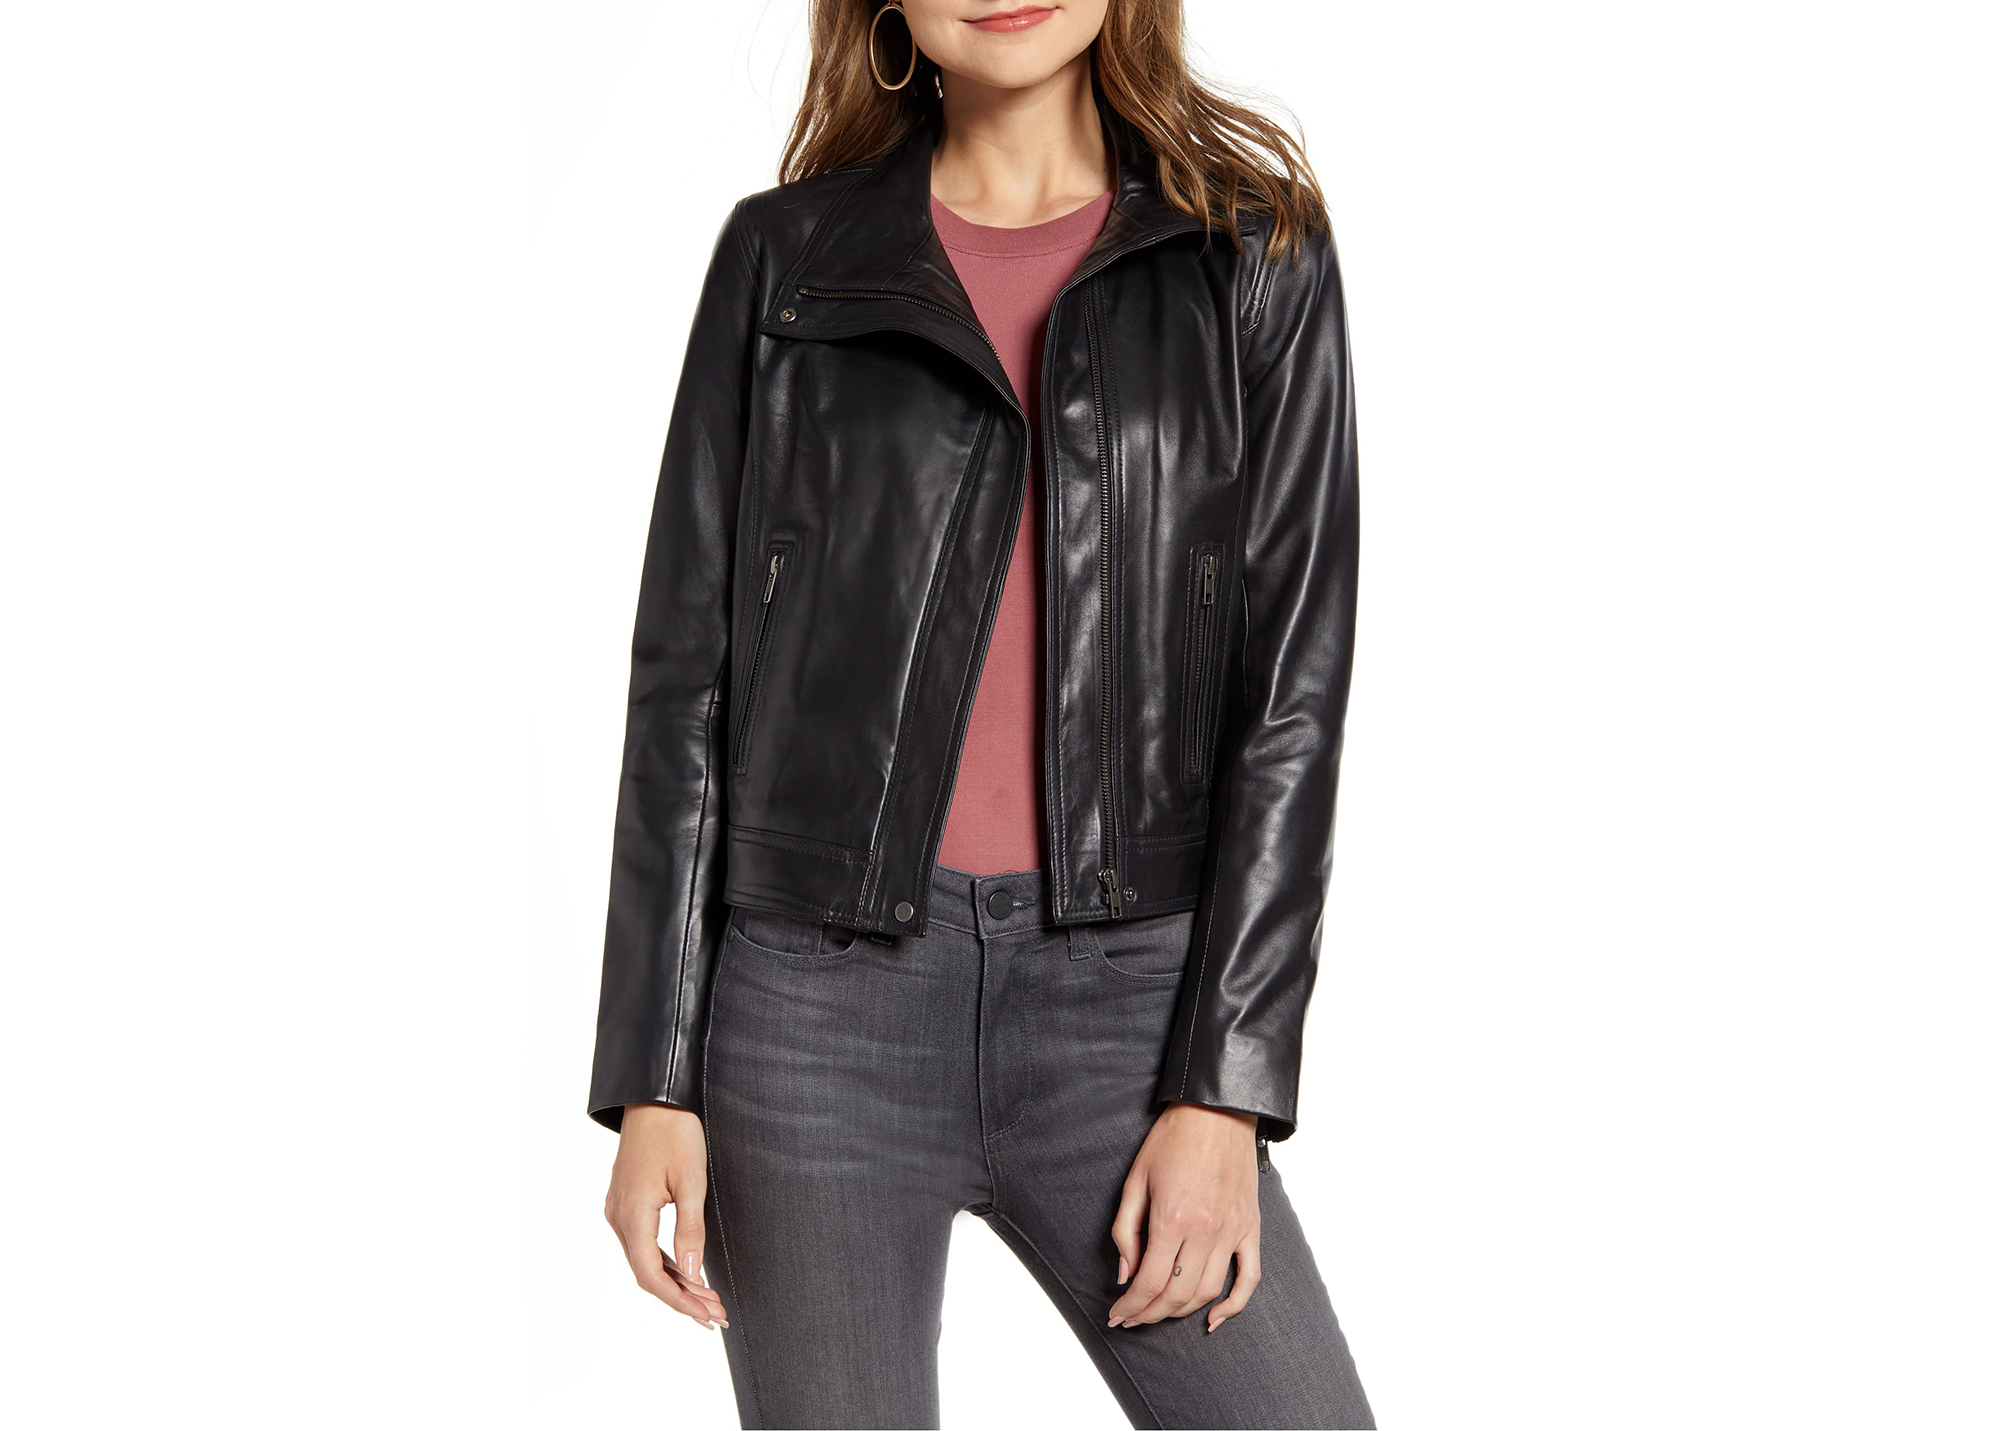 Chelsea 28 Leather Moto Jacket Is Under $200 and Totally Unique